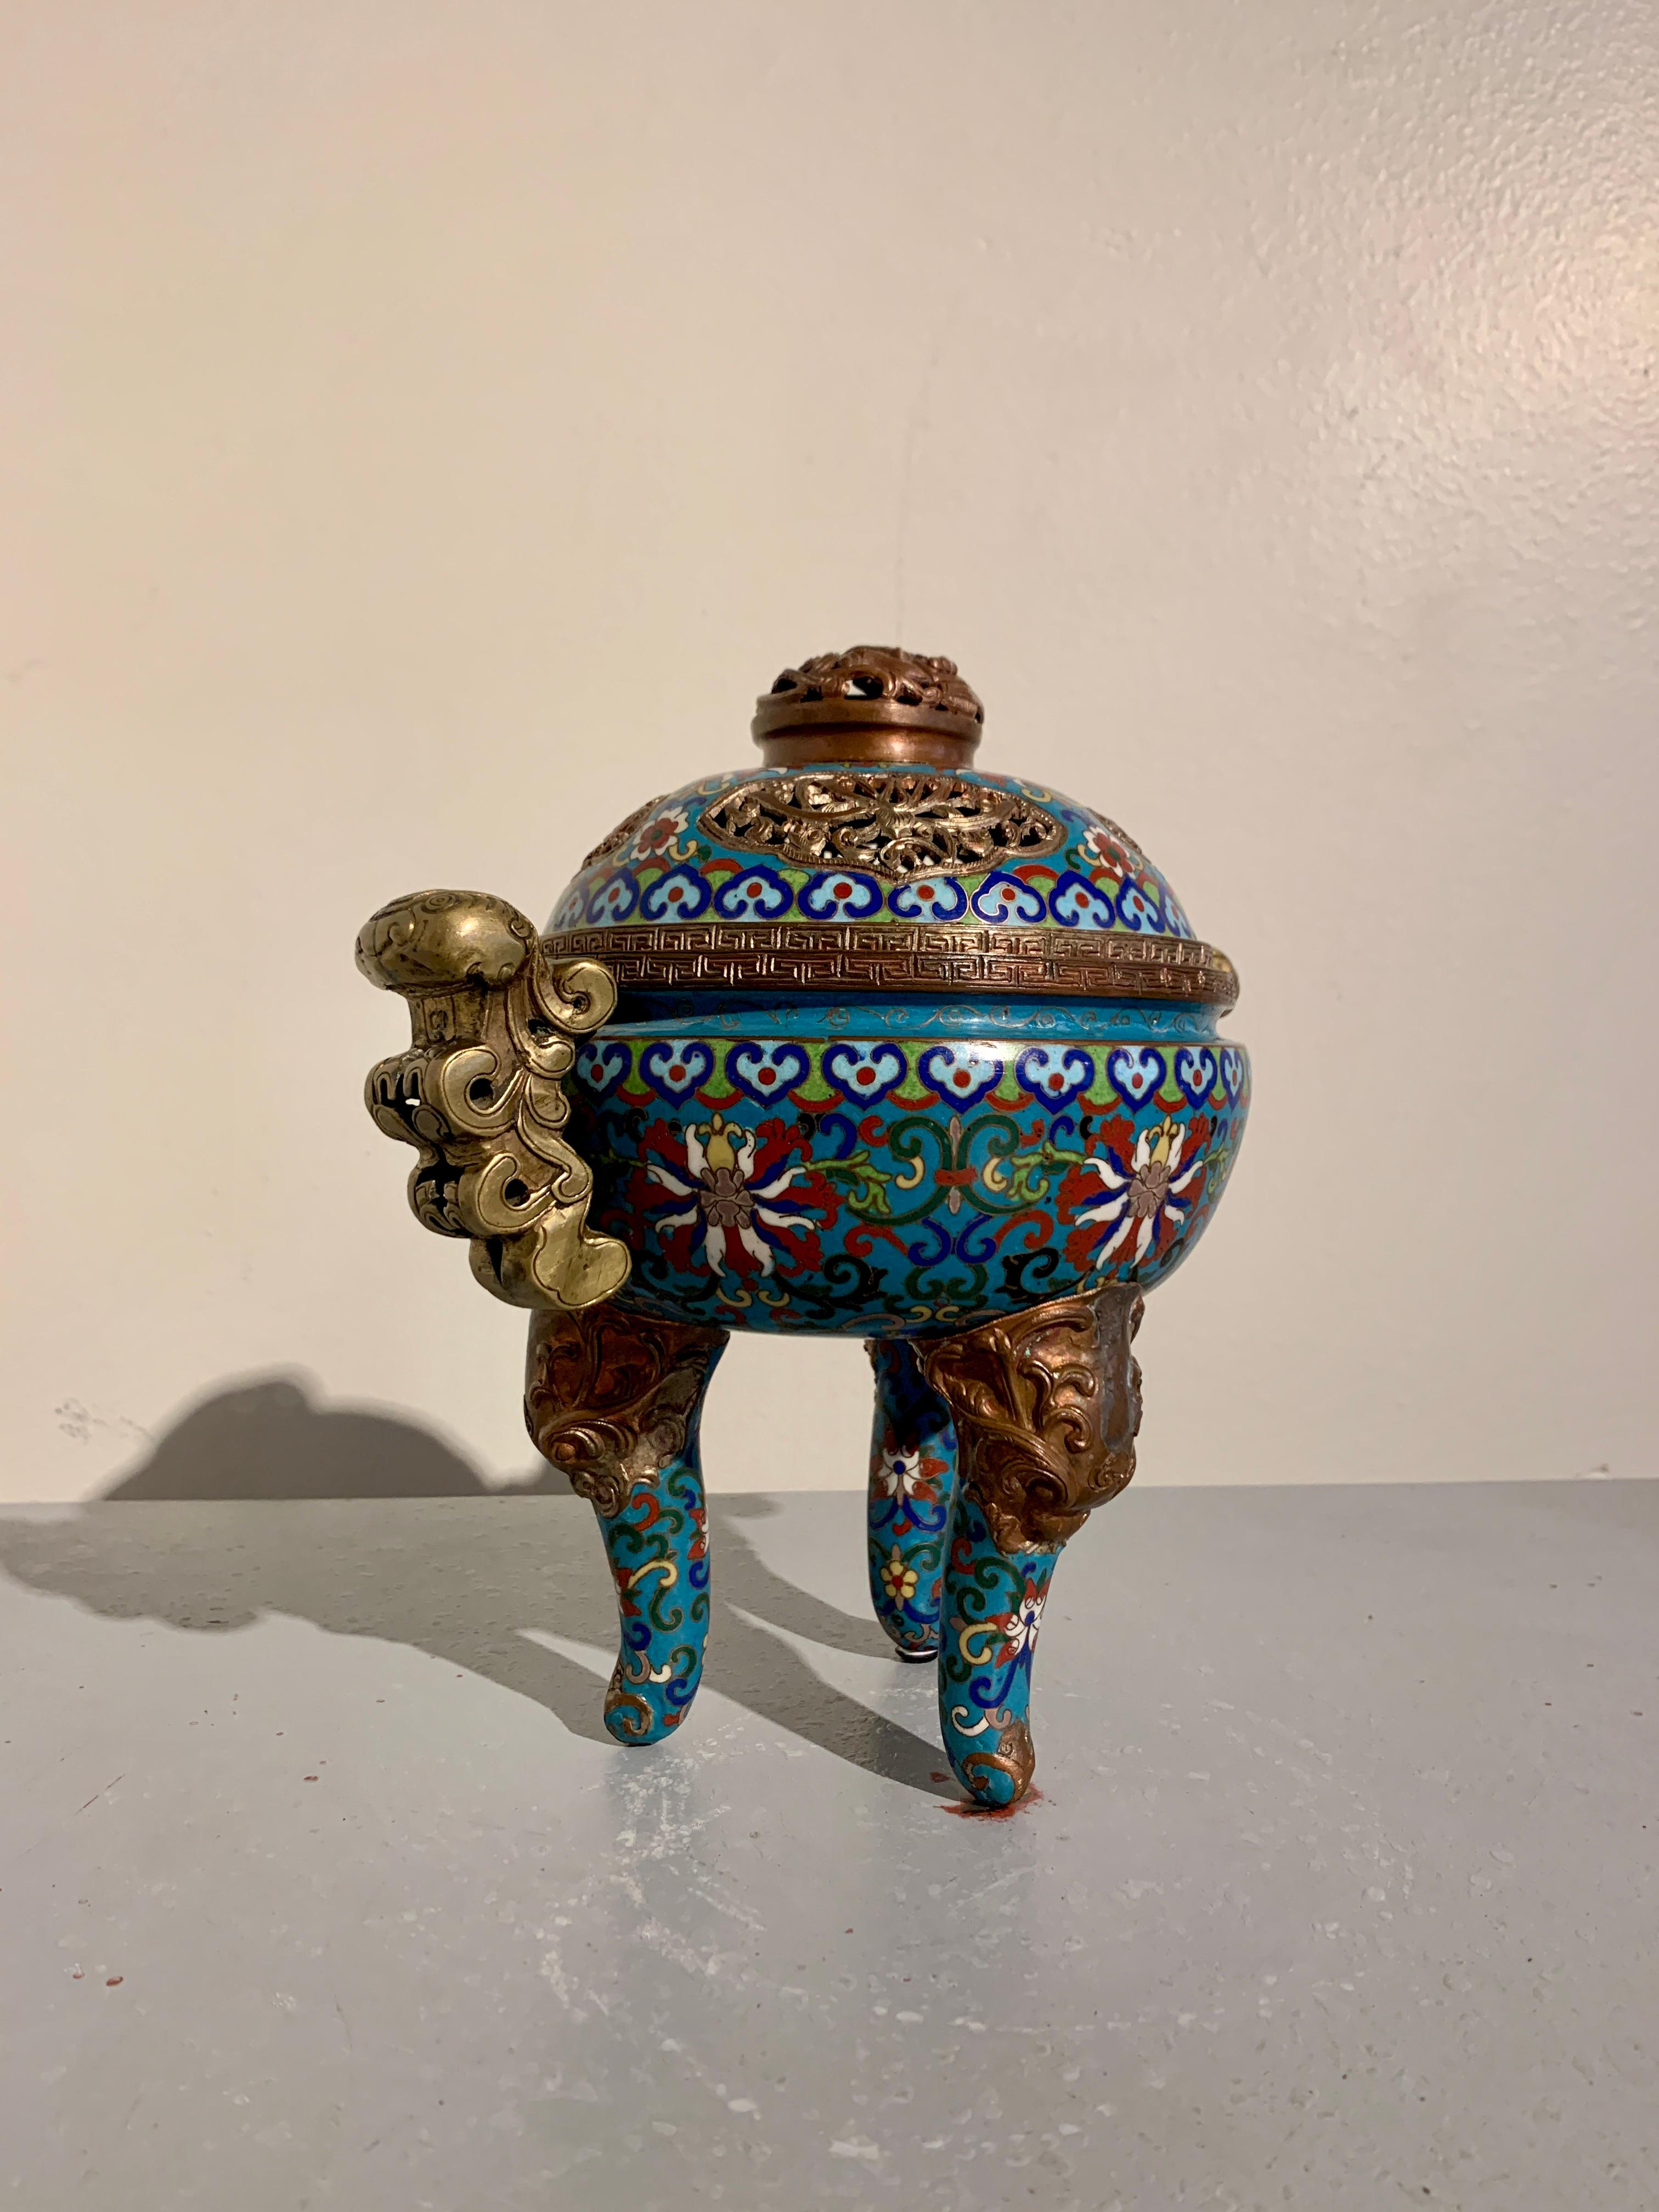 A delightful vintage Chinese cloisonne enamel, copper, and brass tripod censer with pierced cover, circa 1970's, China.

The censer with a globular body set on three gracious cabriole legs emerging from copper masks of horned mythical beasts,